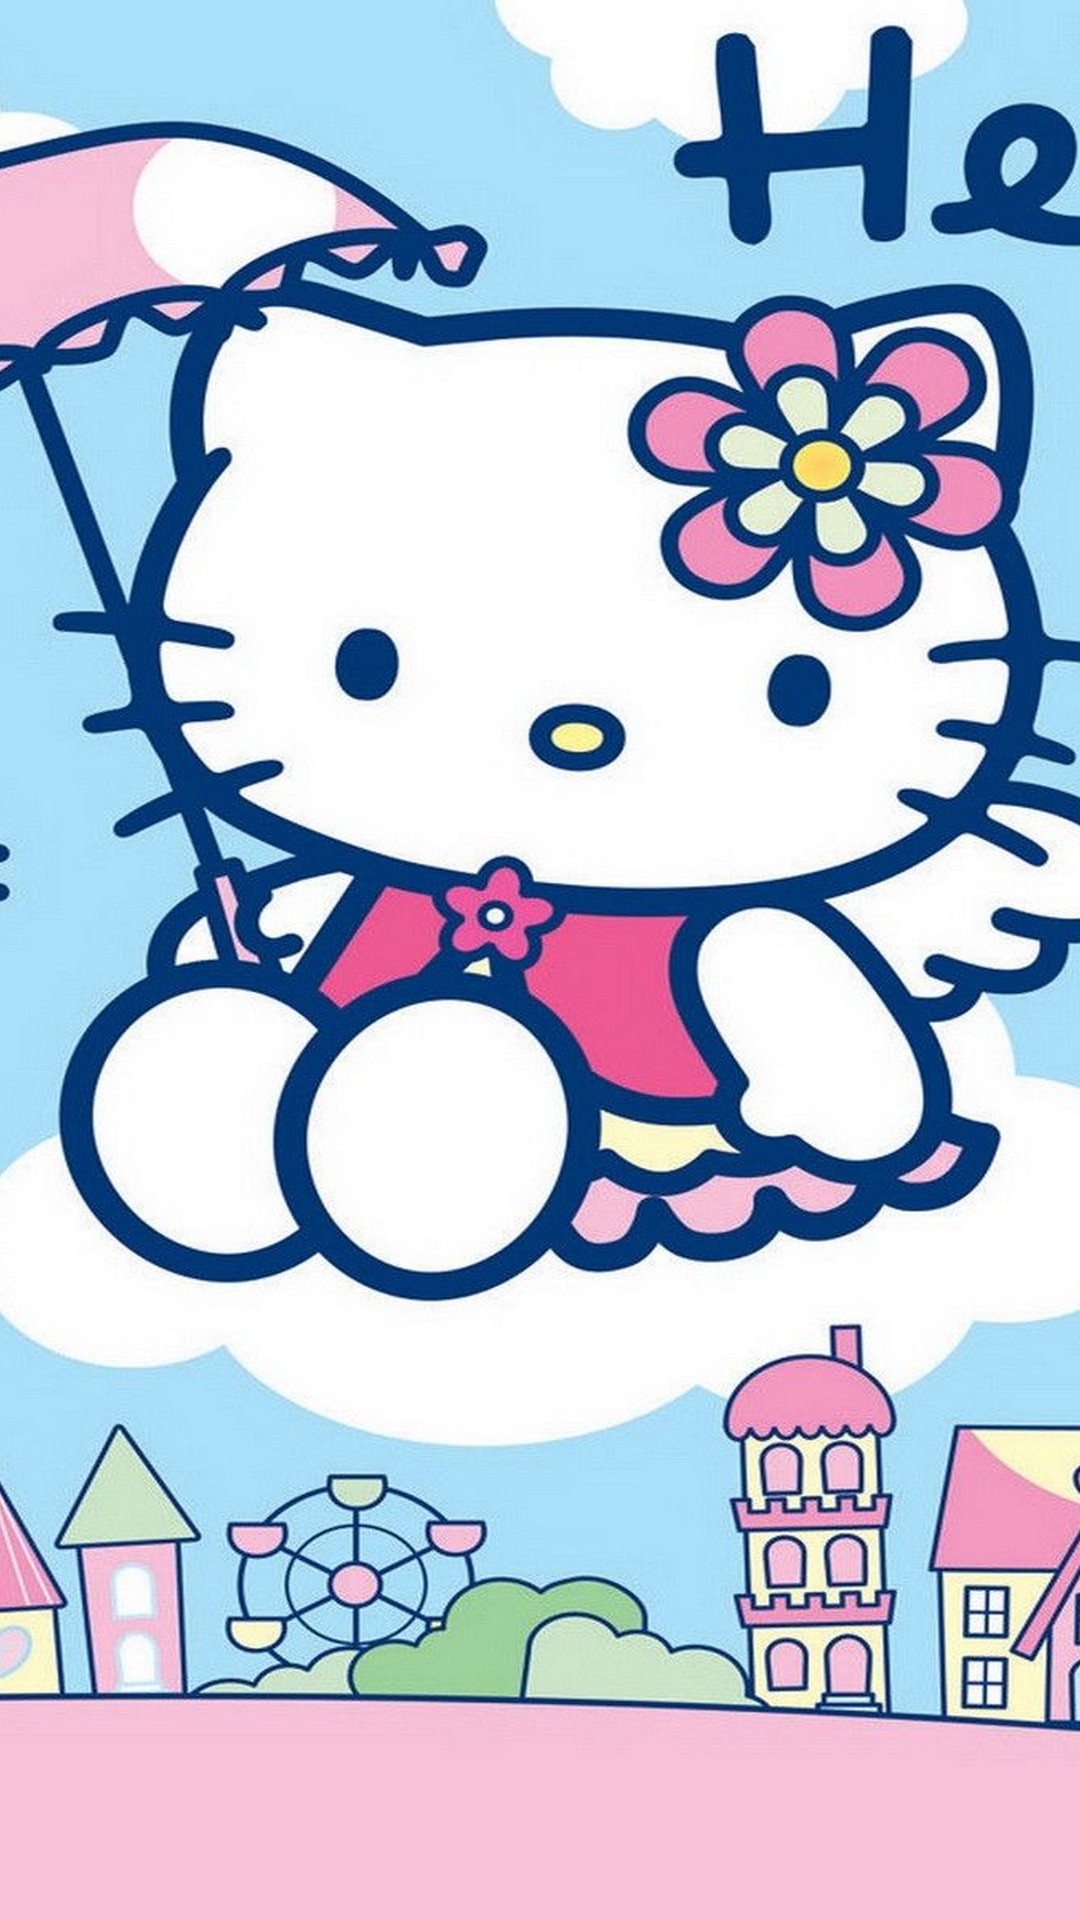 Kitty Wallpaper For iPhone with image resolution 1080x1920 pixel. You can make this wallpaper for your iPhone 5, 6, 7, 8, X backgrounds, Mobile Screensaver, or iPad Lock Screen